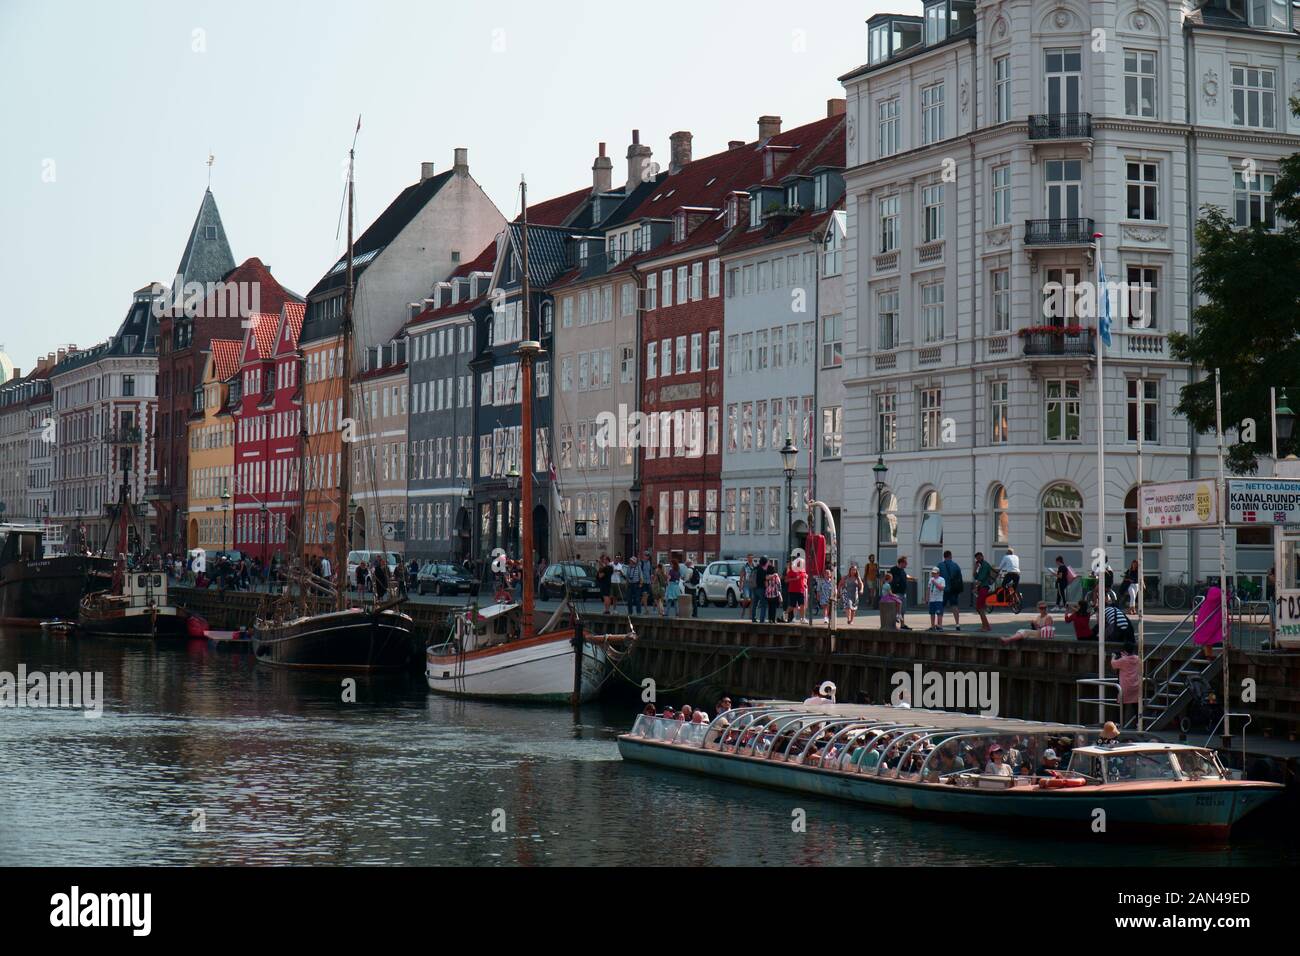 Boat giving canal tours stopped in Nyhavn, Copenhagen Stock Photo